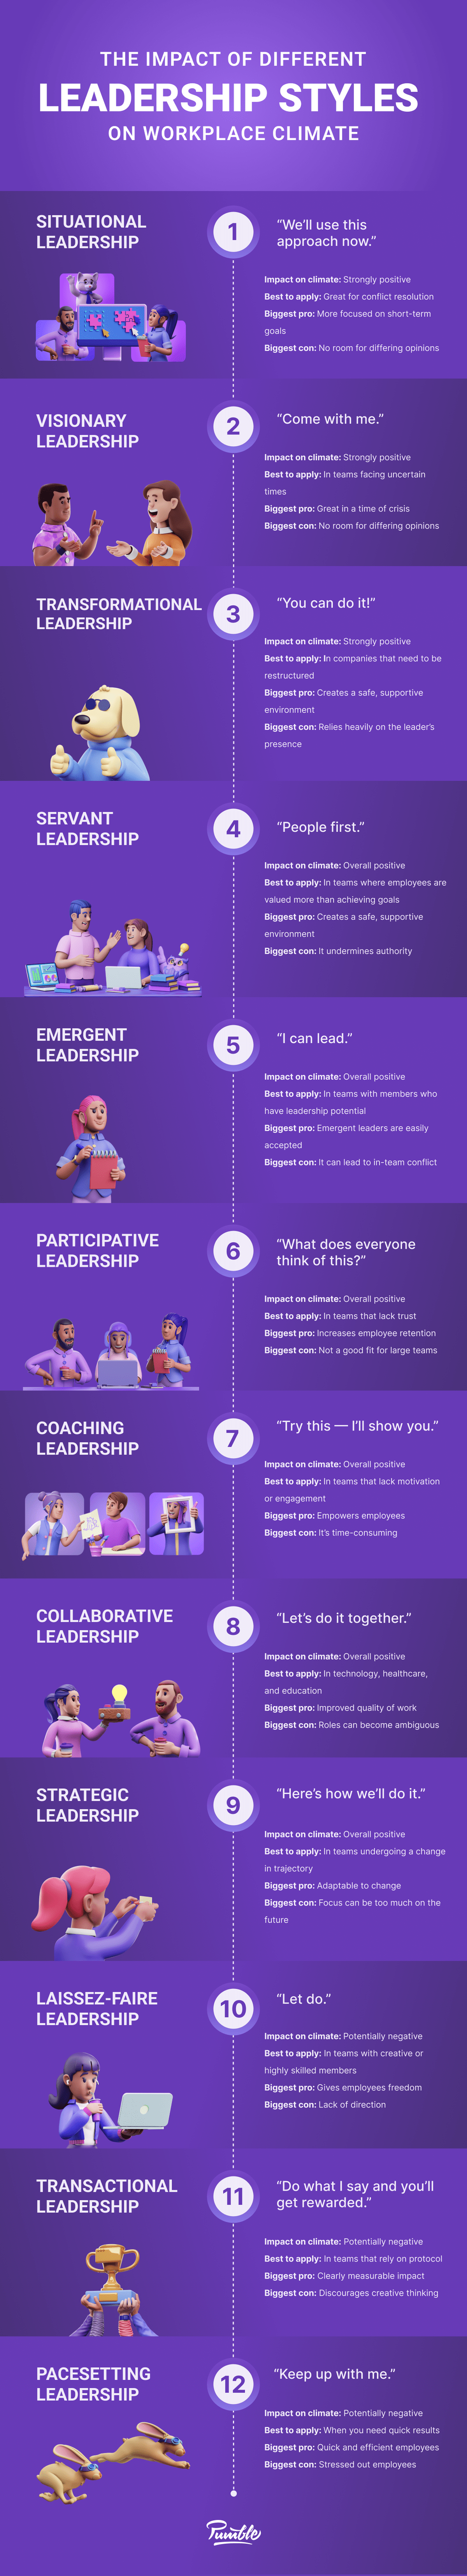 Impact of leadership styles on workplace culture